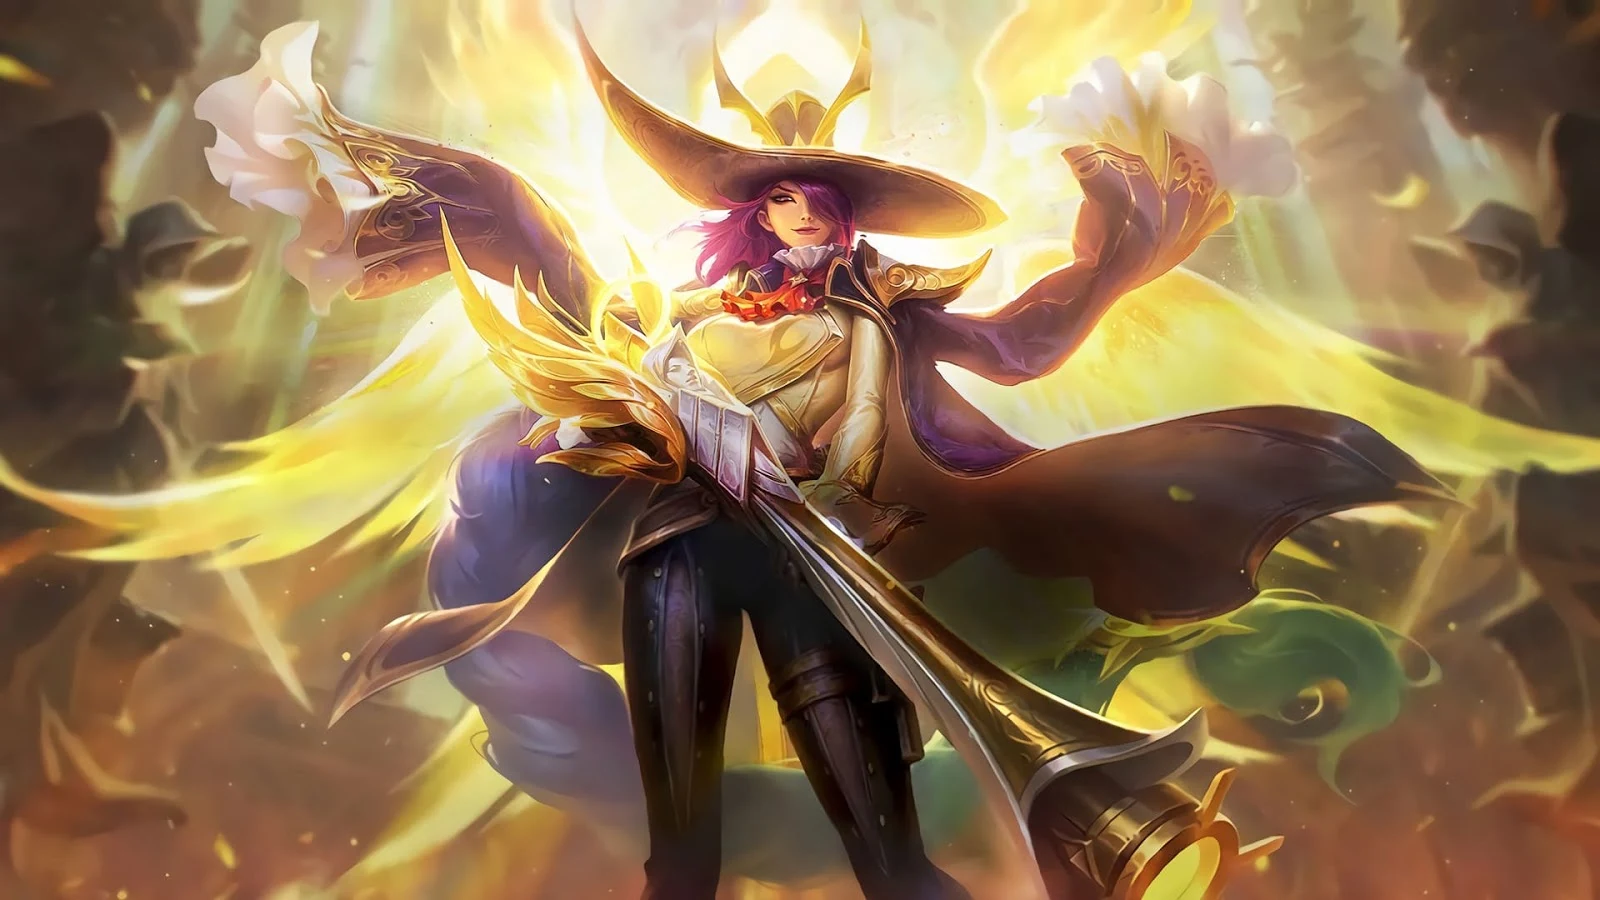 Collection#1 10+ Wallpaper Lesley Mobile Legends (ML) Full HD for PC, Android & iOS